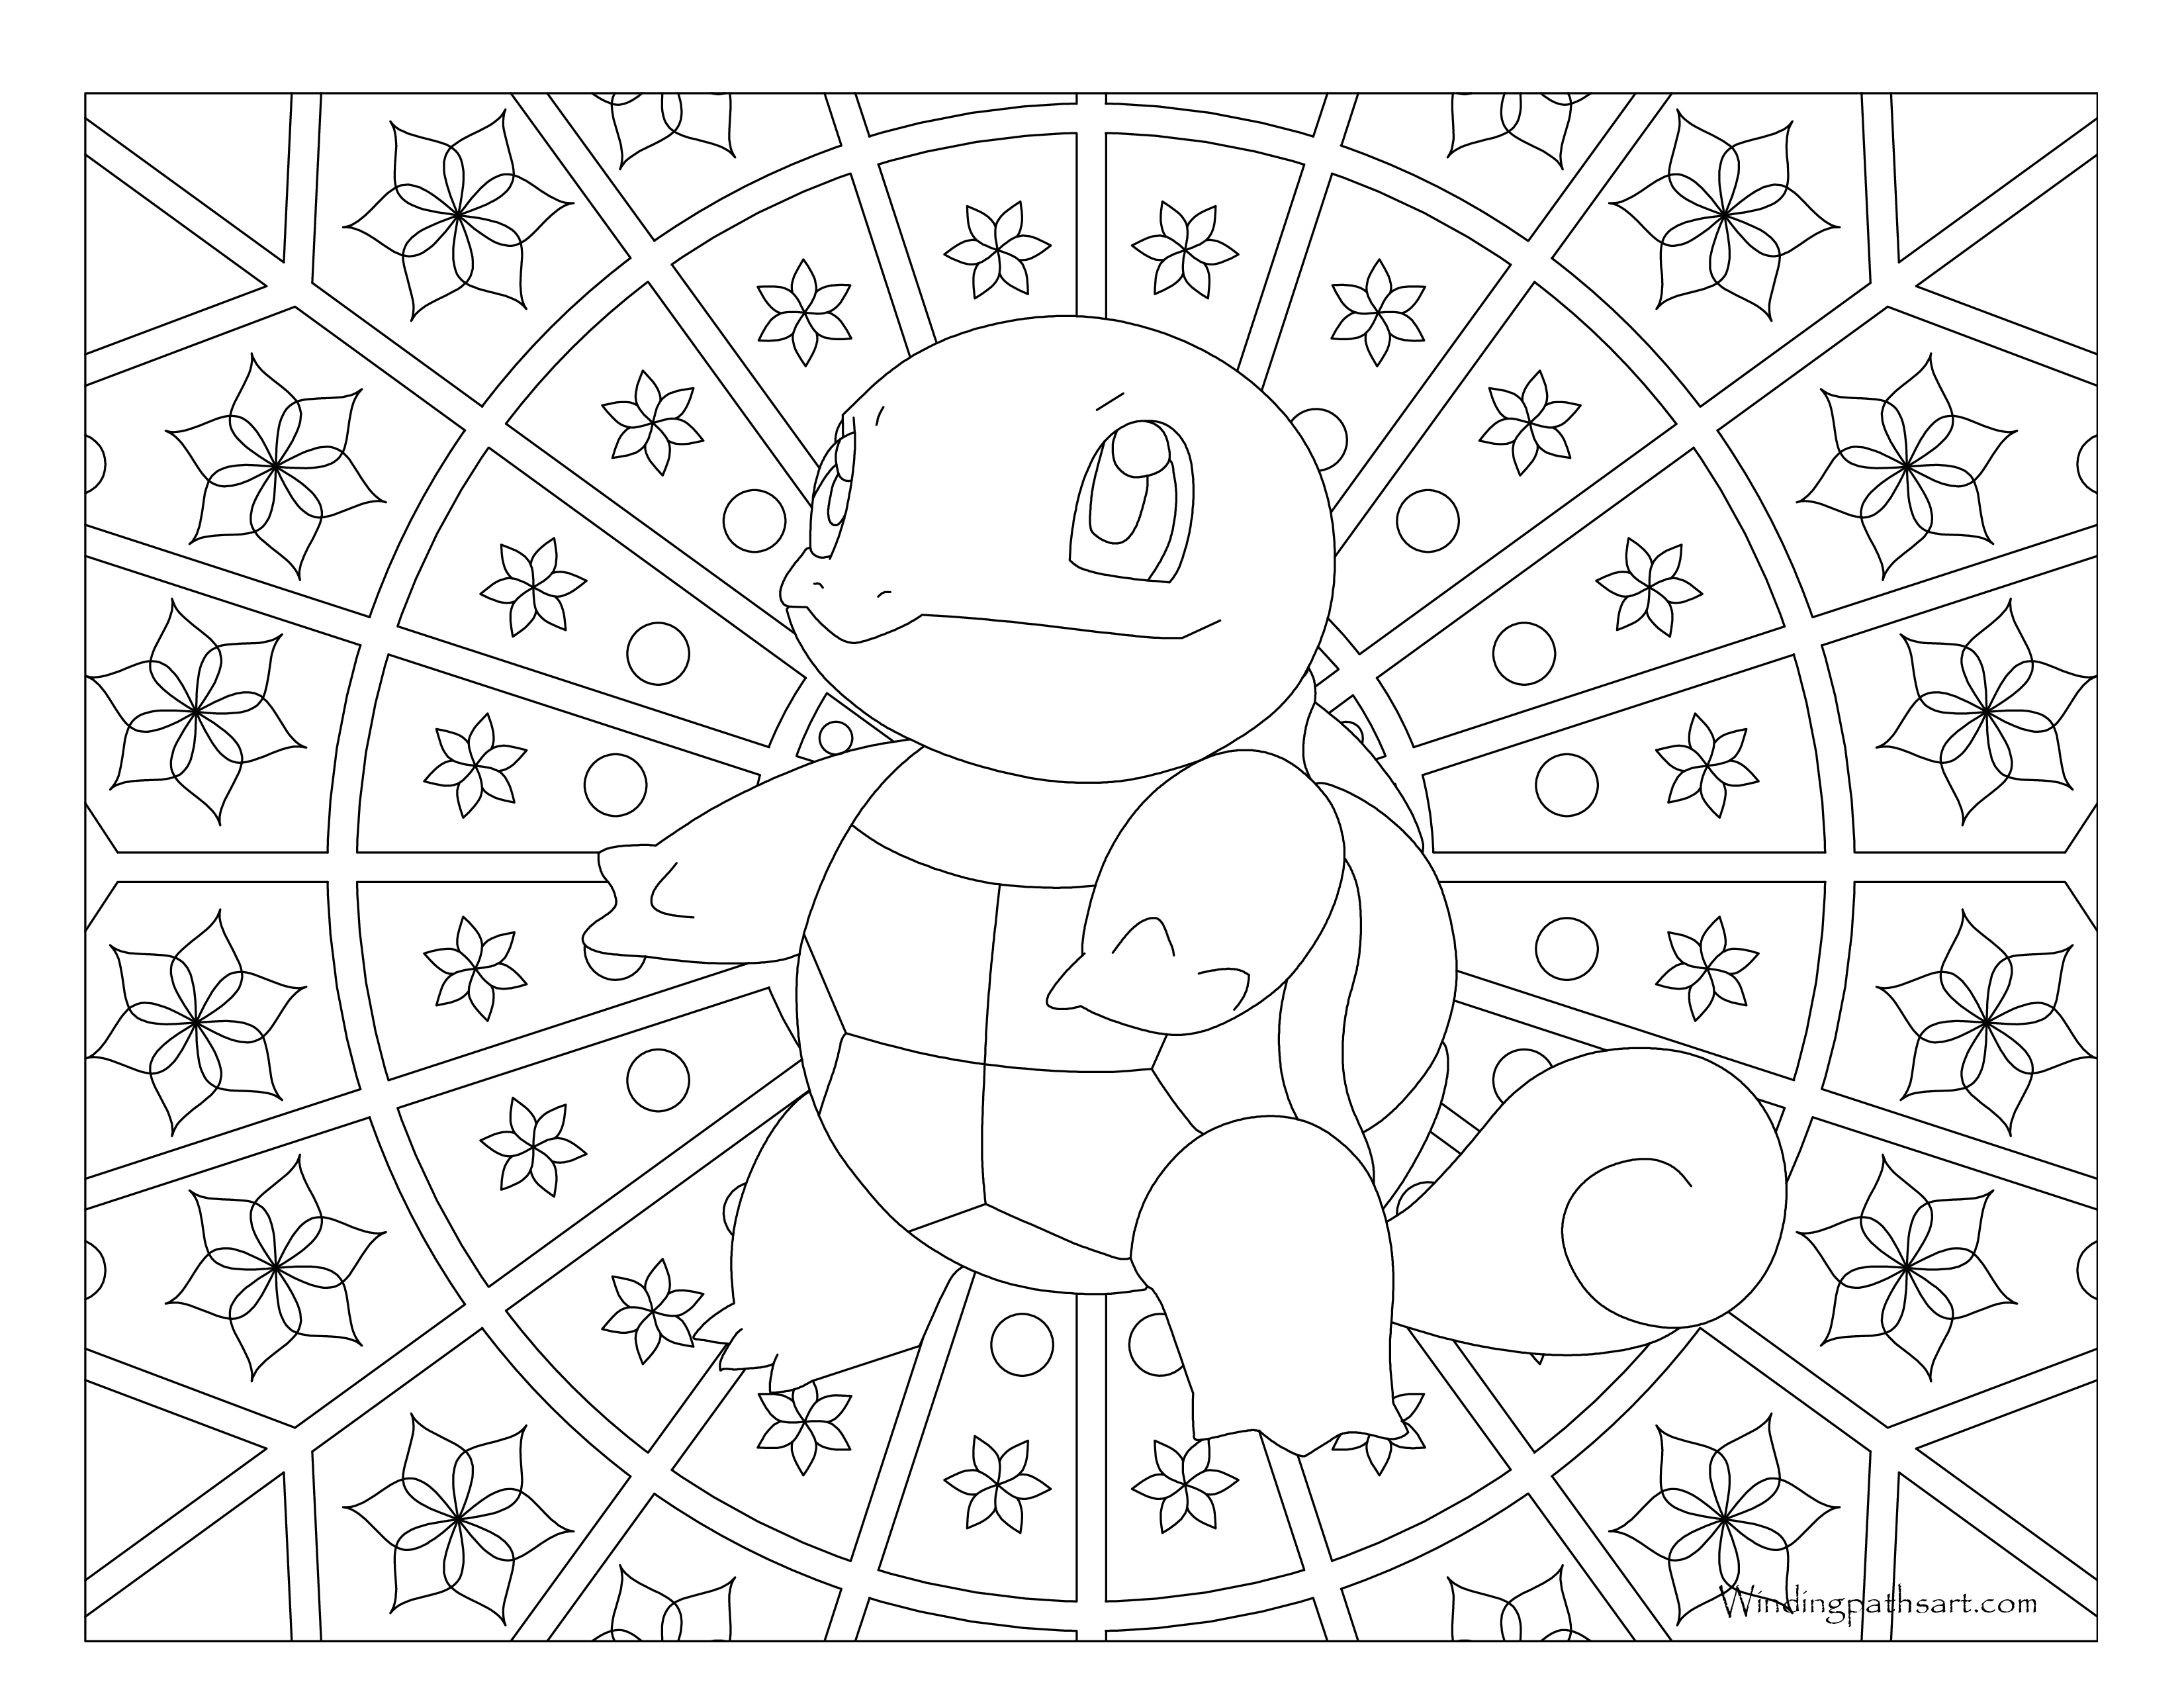 20 Squirtle Pokemon Coloring Page · Windingpathsart.com